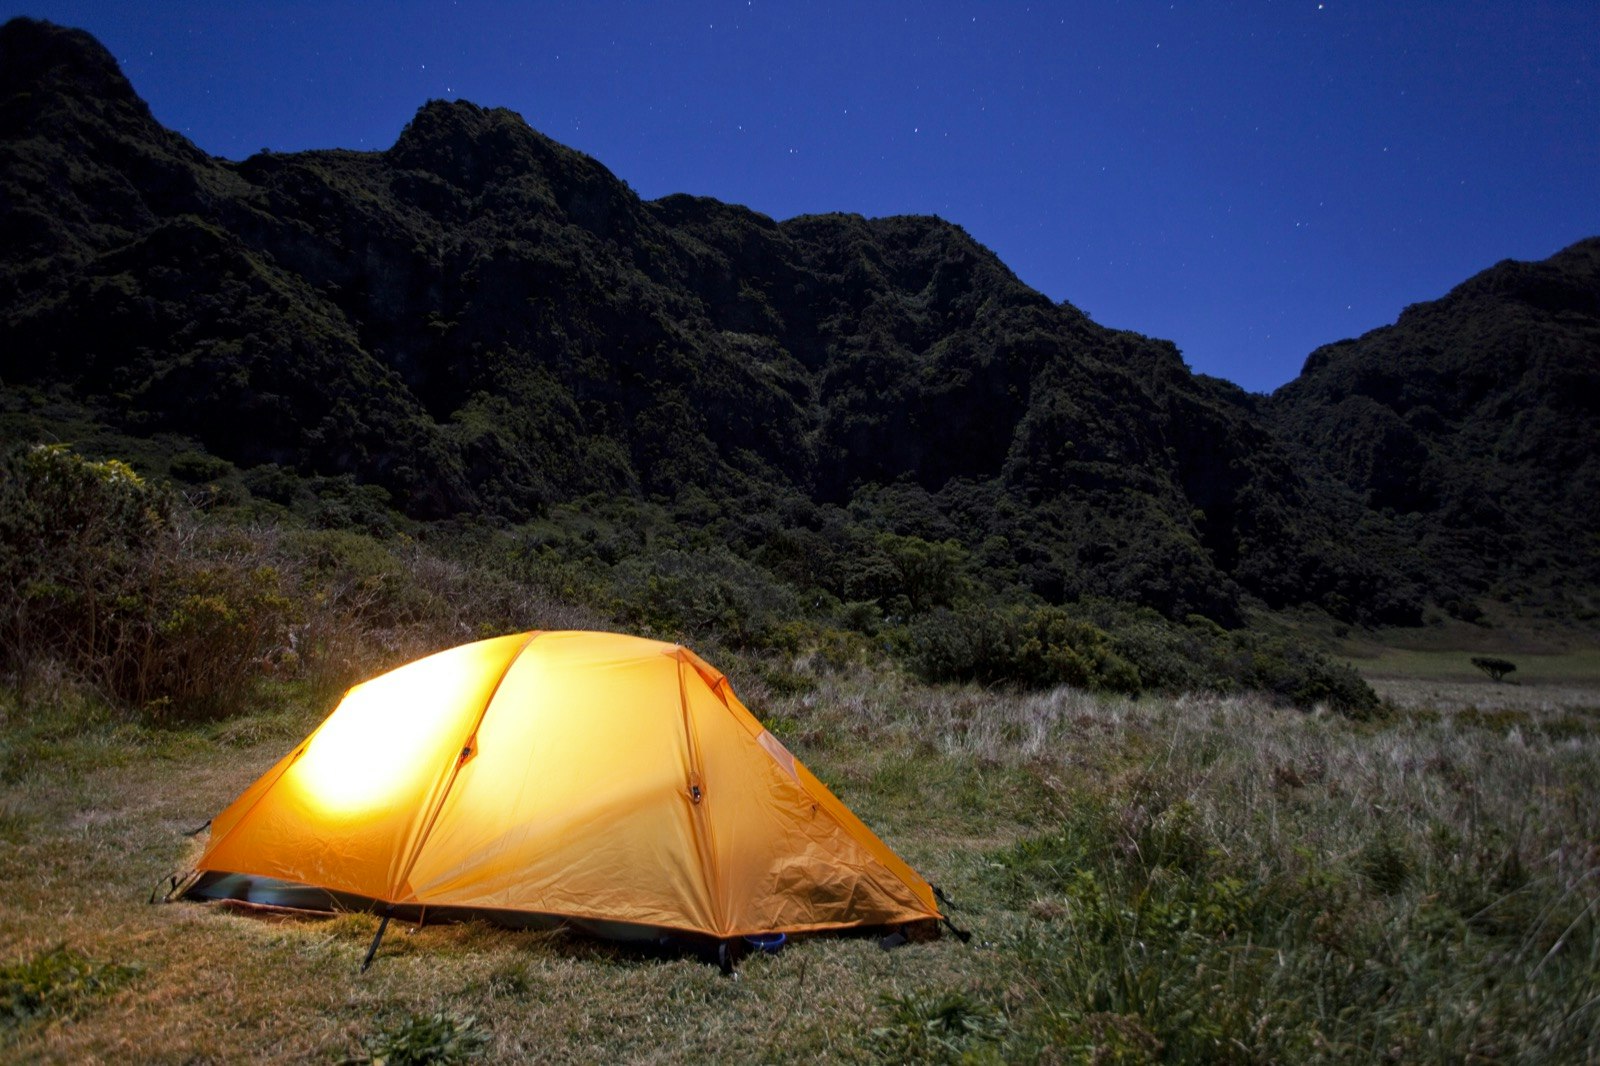 A glowing orange tent in Haleakala National Park surrounded by black peaks and a deep blue night sky.jpg